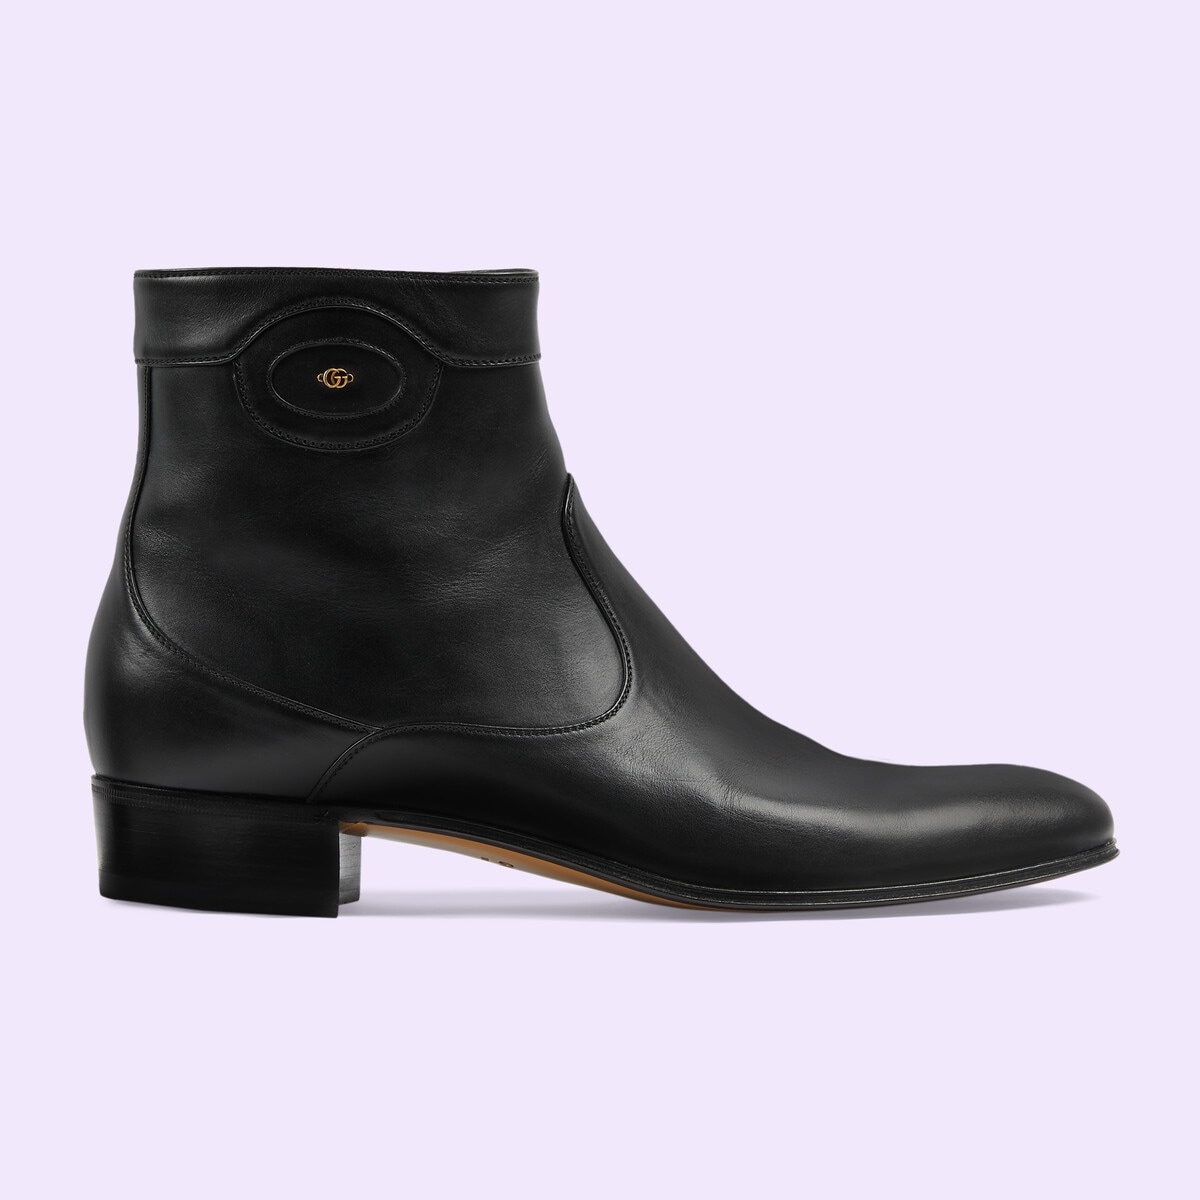 Men's ankle boot with Double G - 1